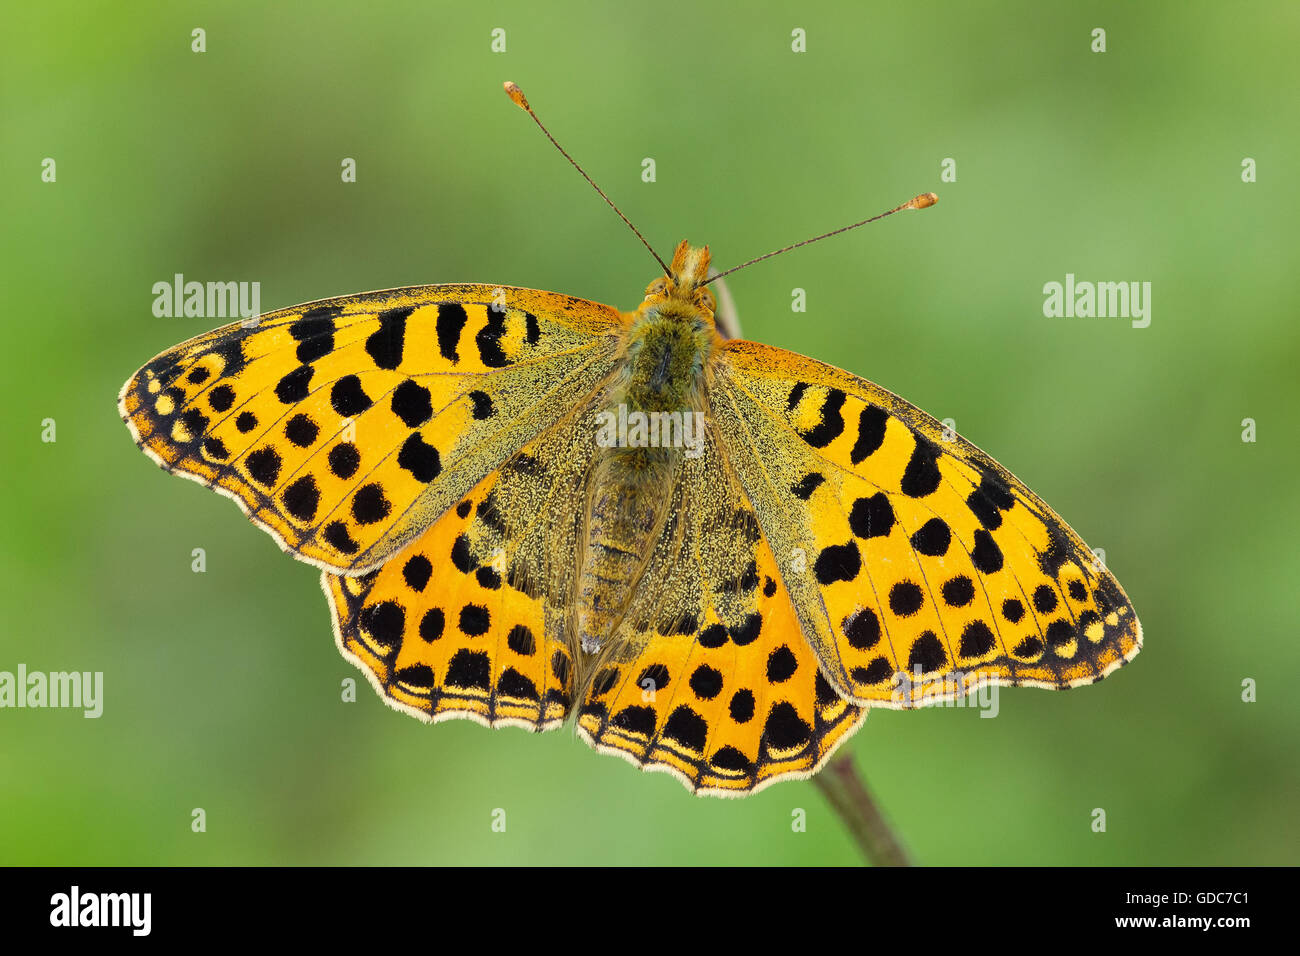 Nature,Animal,Butterfly,Lepidoptera,Insect,Wild,Switzerland,Queen of Spain fritillary,Issoria lathonia Stock Photo